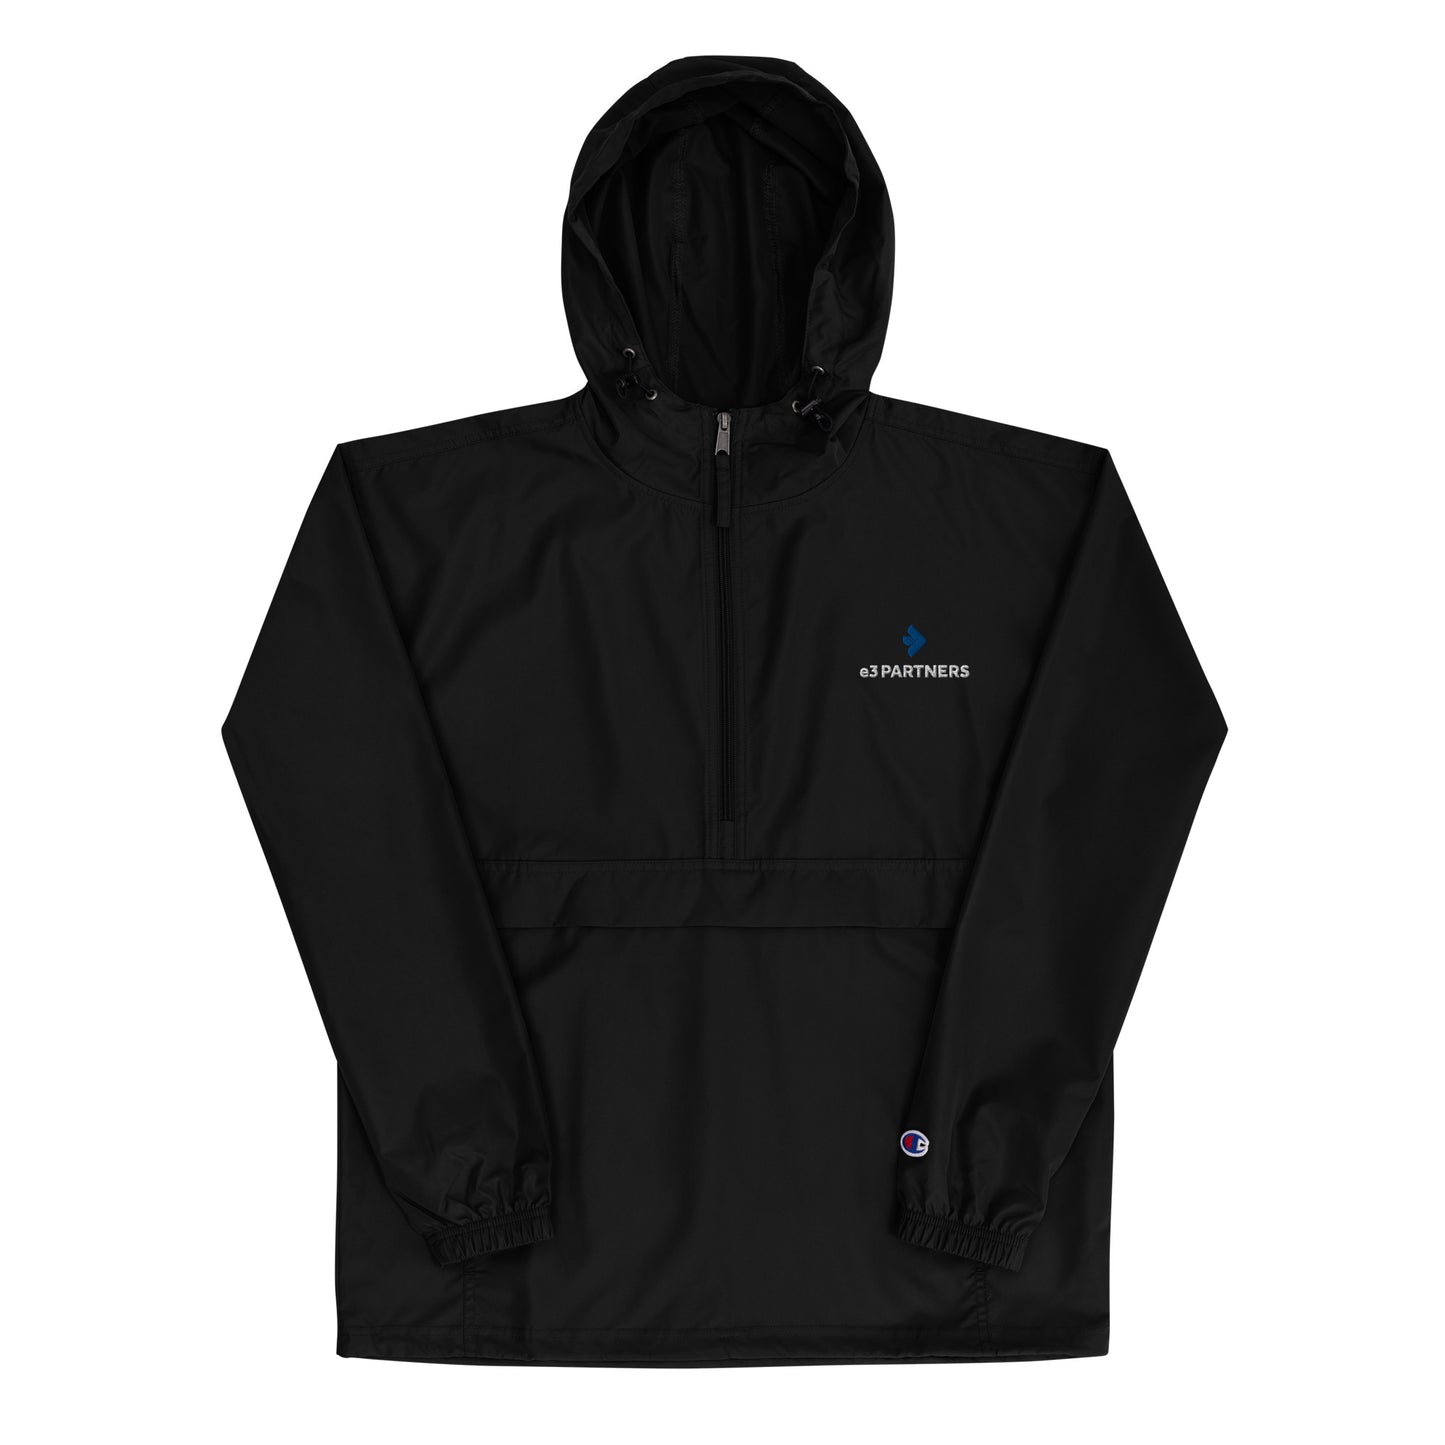 e3 Partners - Embroidered Champion Packable Jacket